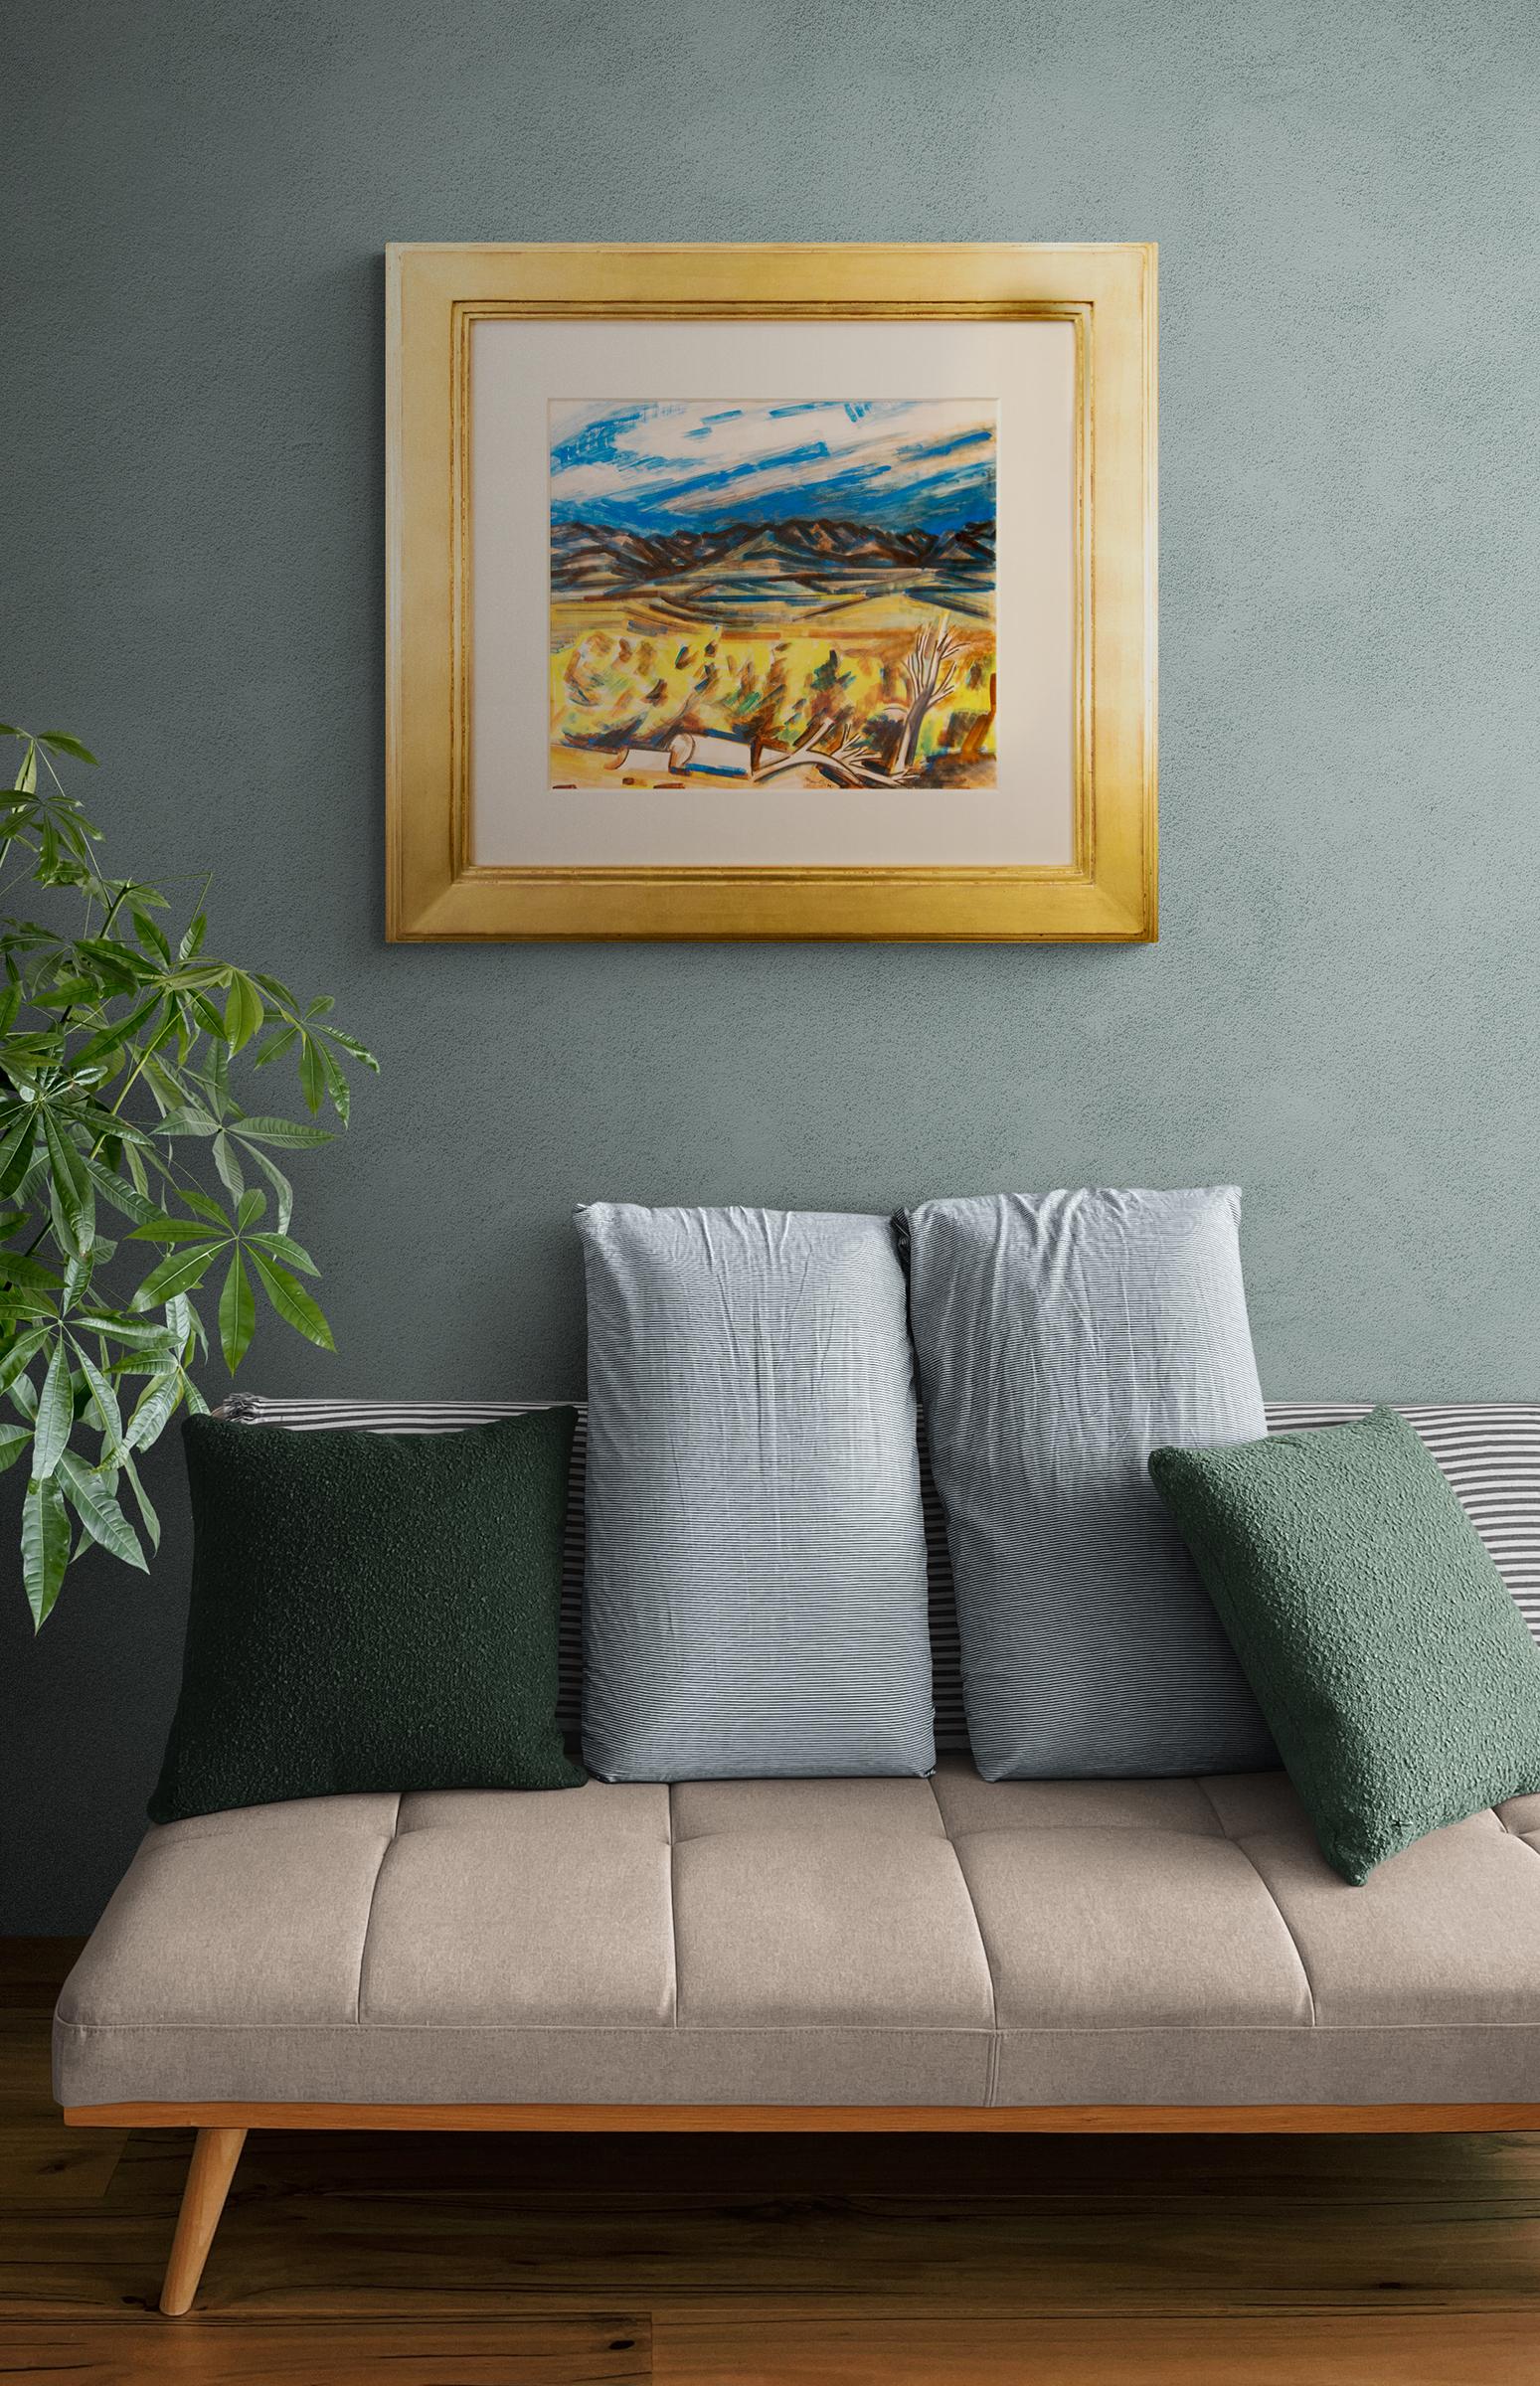 Untitled (Colorado Autumn Landscape) is a watercolor painting by Hayes Lyon (1901-1987) circa 1945 viewing the Rocky Mountains from the plains with blue, yellow and brown. Presented in a custom gold frame with all archival materials, outer